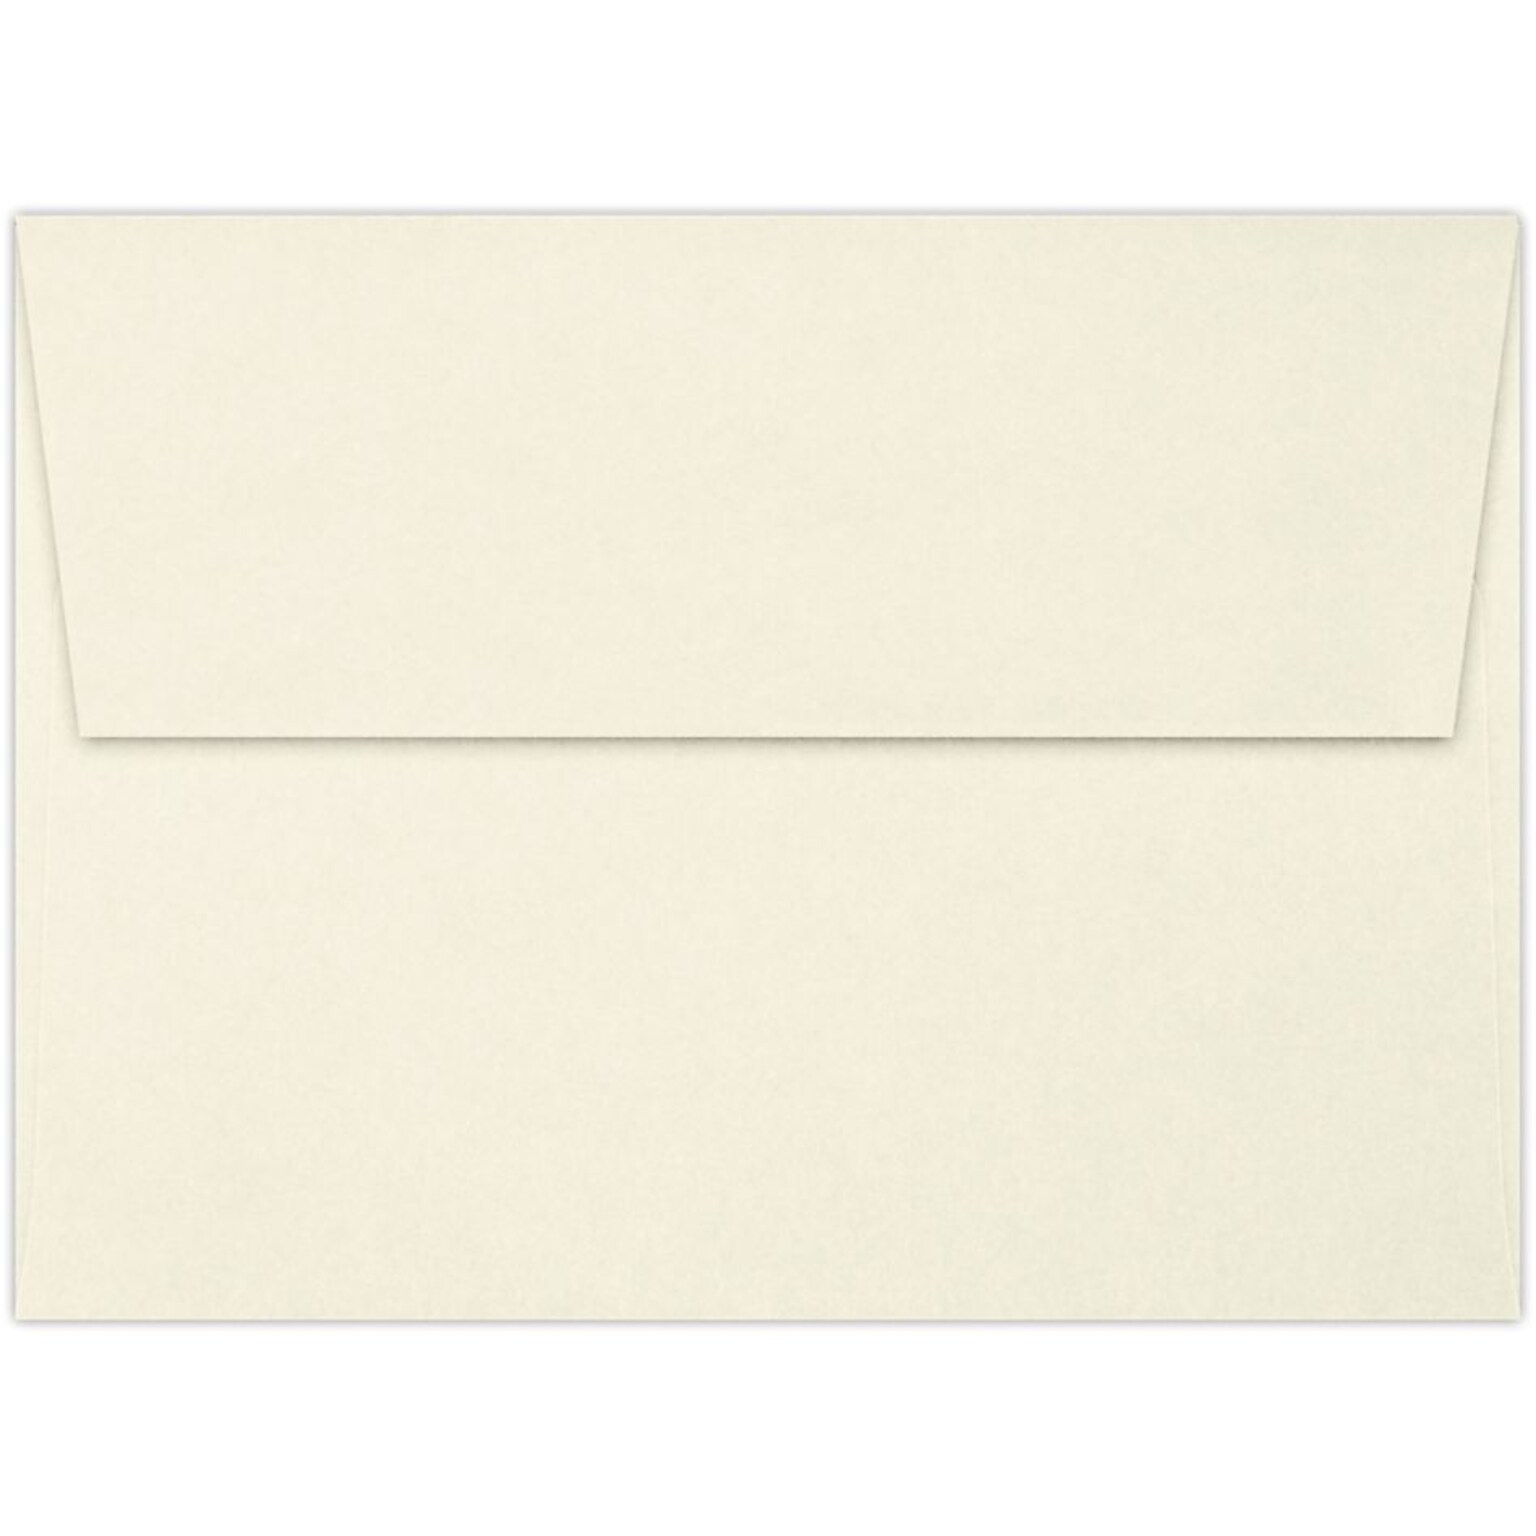 LUX A6 Invitation Envelopes (4 3/4 x 6 1/2) 500/Pack, Classic Linen® Baronial Ivory (4875-70BILI-500)